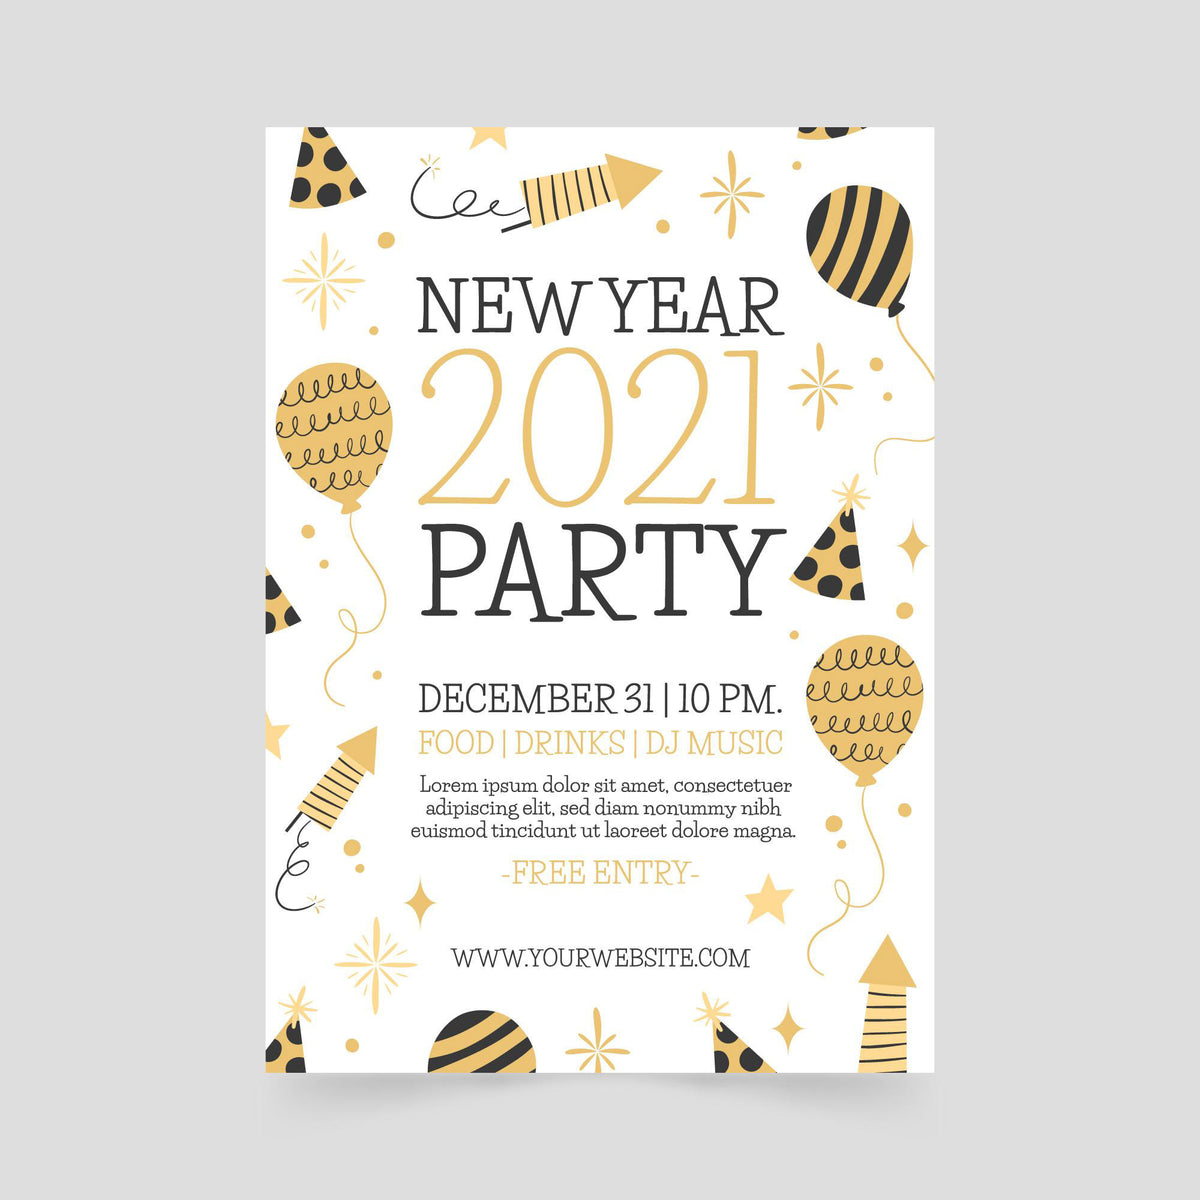 Plantable Page 3 New Year Eco Greetings & Party Invitation